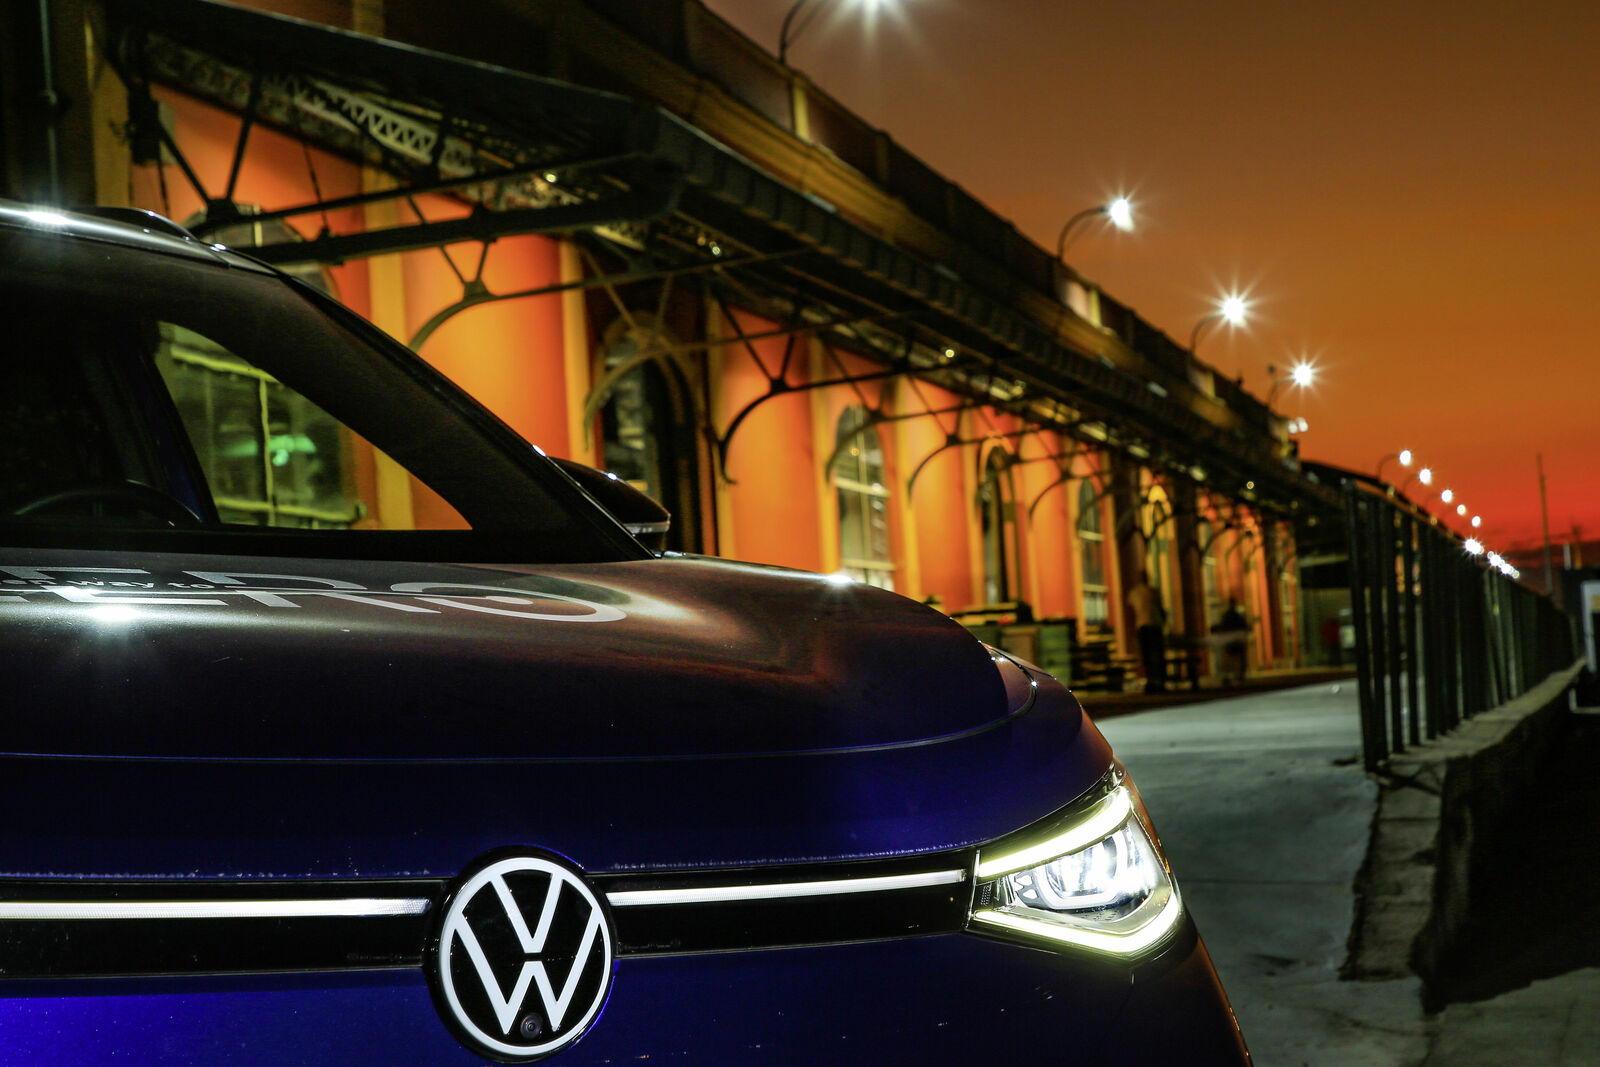 Volkswagen brand invests one billion euros for growth in South America